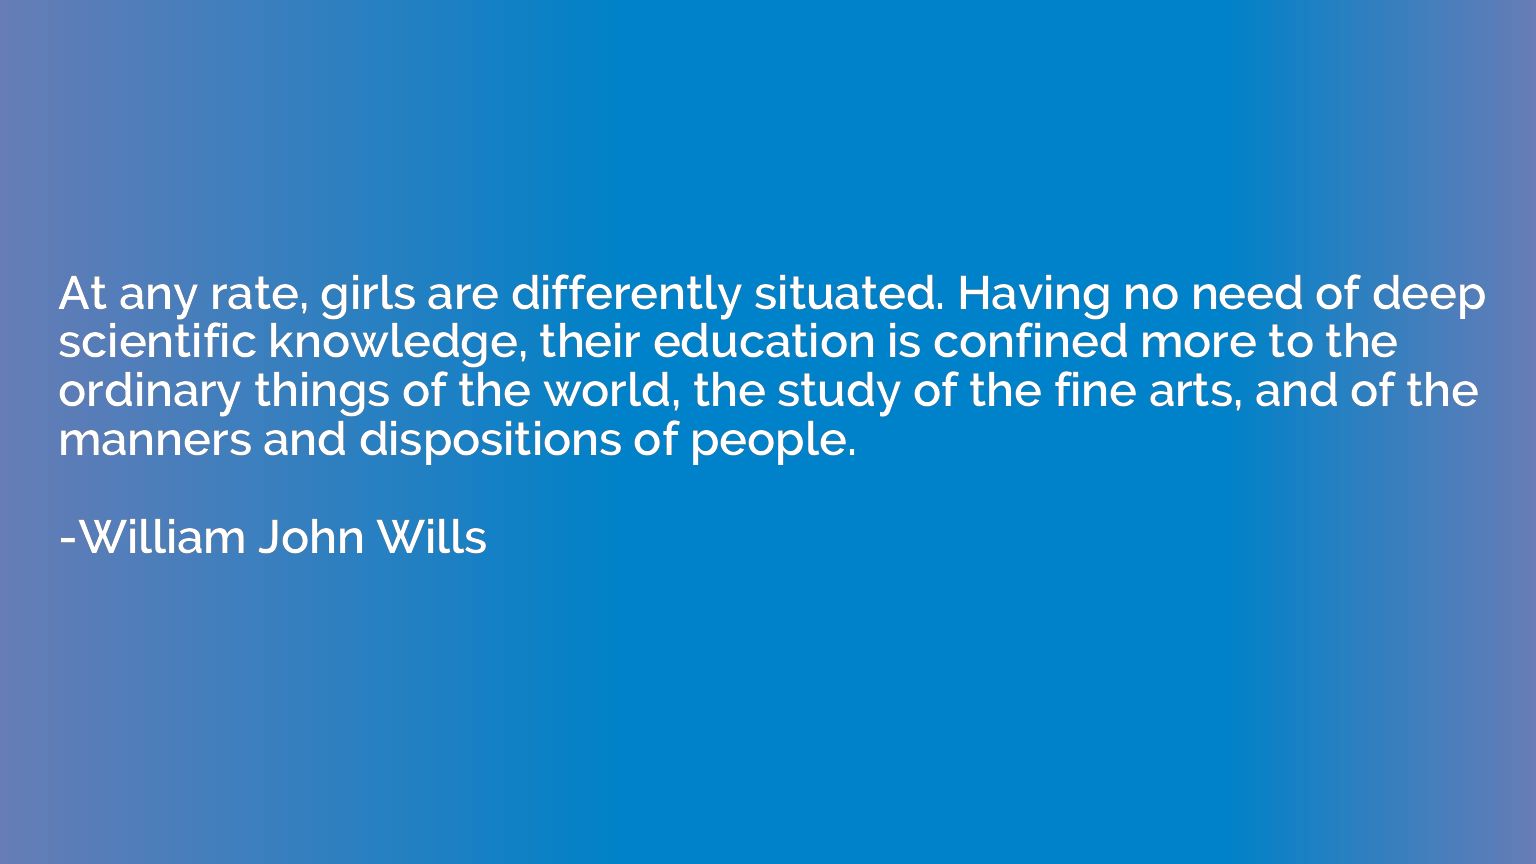 At any rate, girls are differently situated. Having no need 